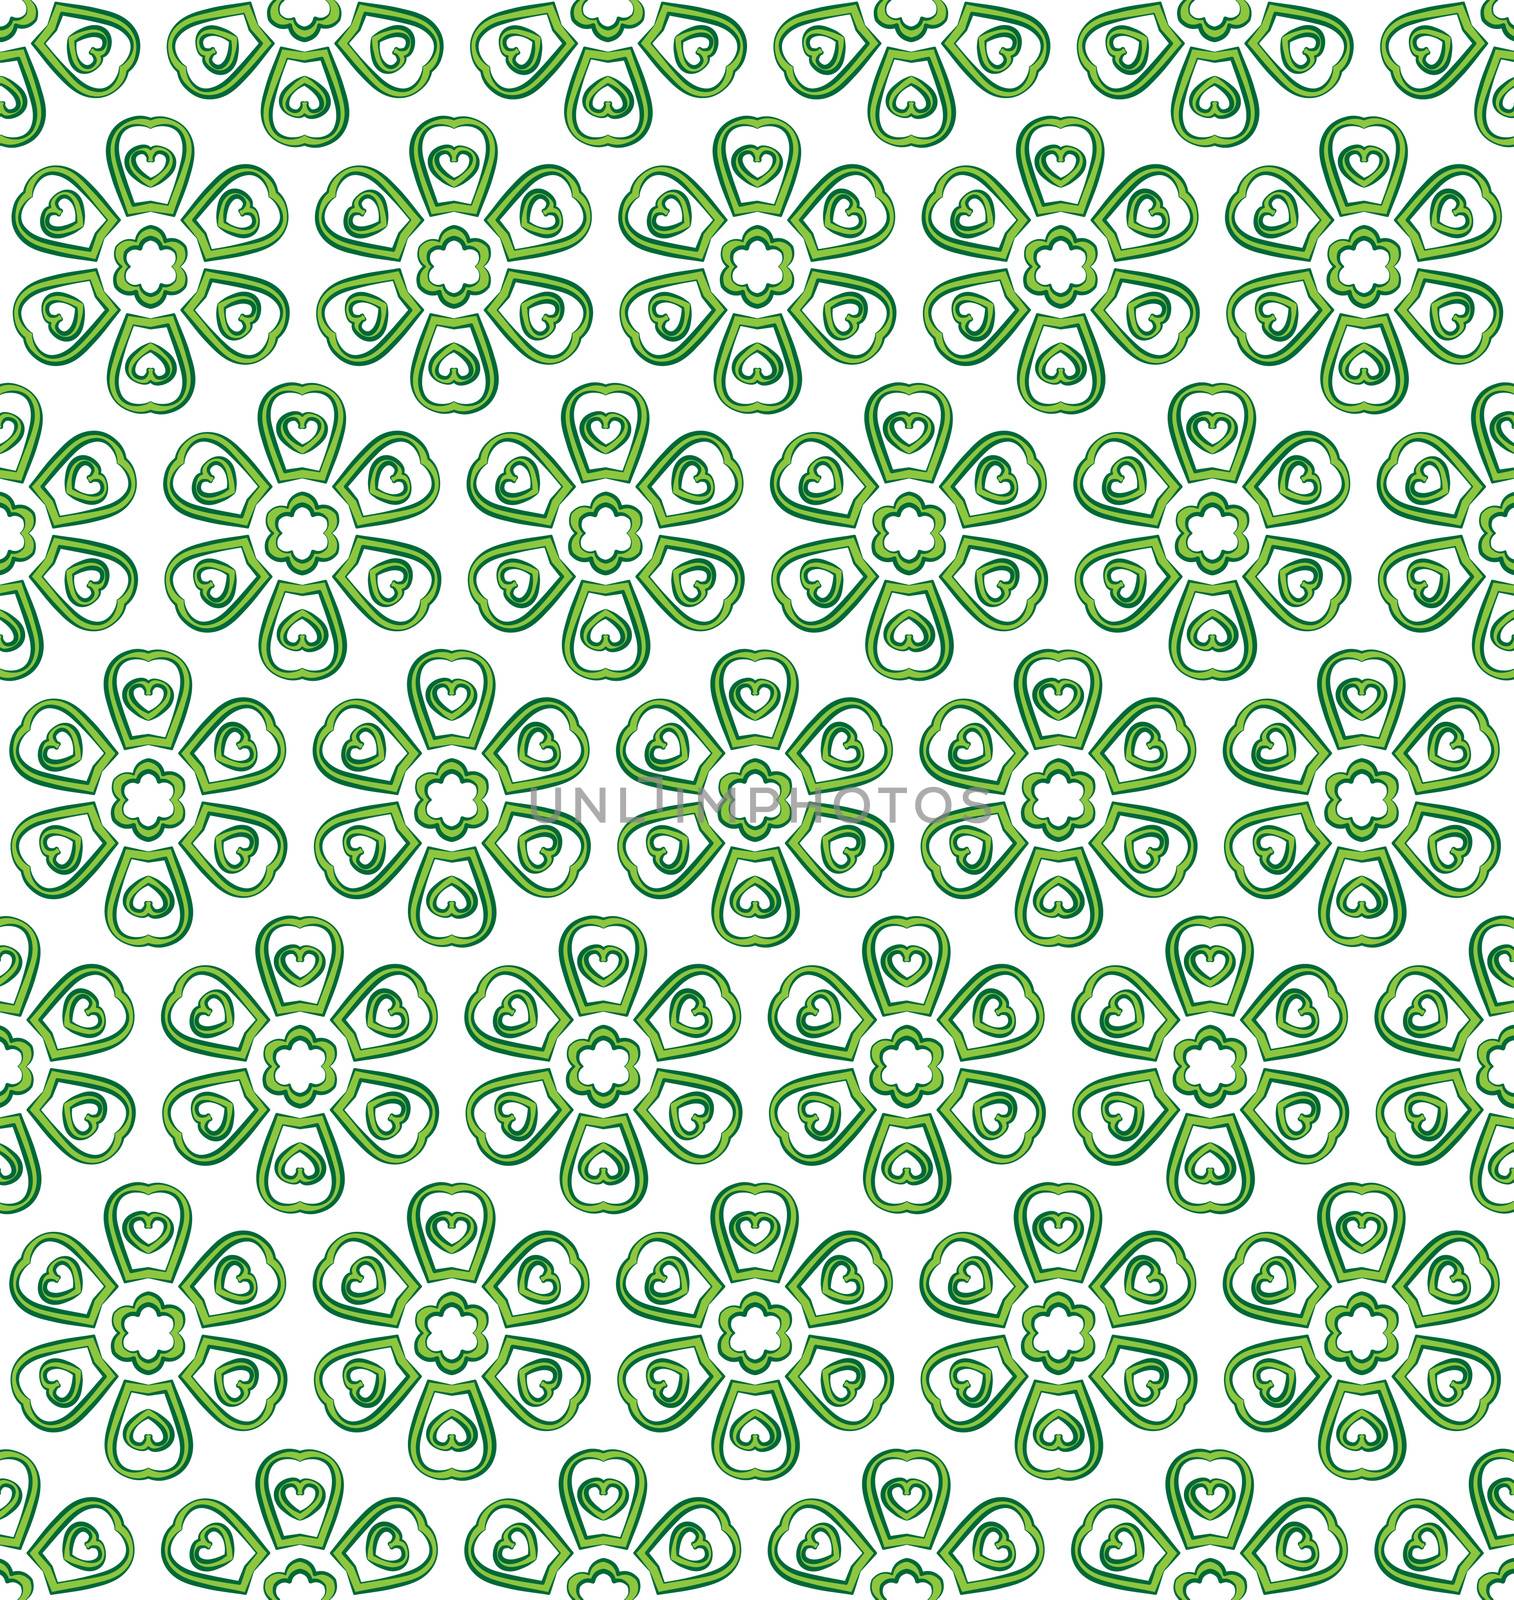 background or textile pattern of green six leaf flowers